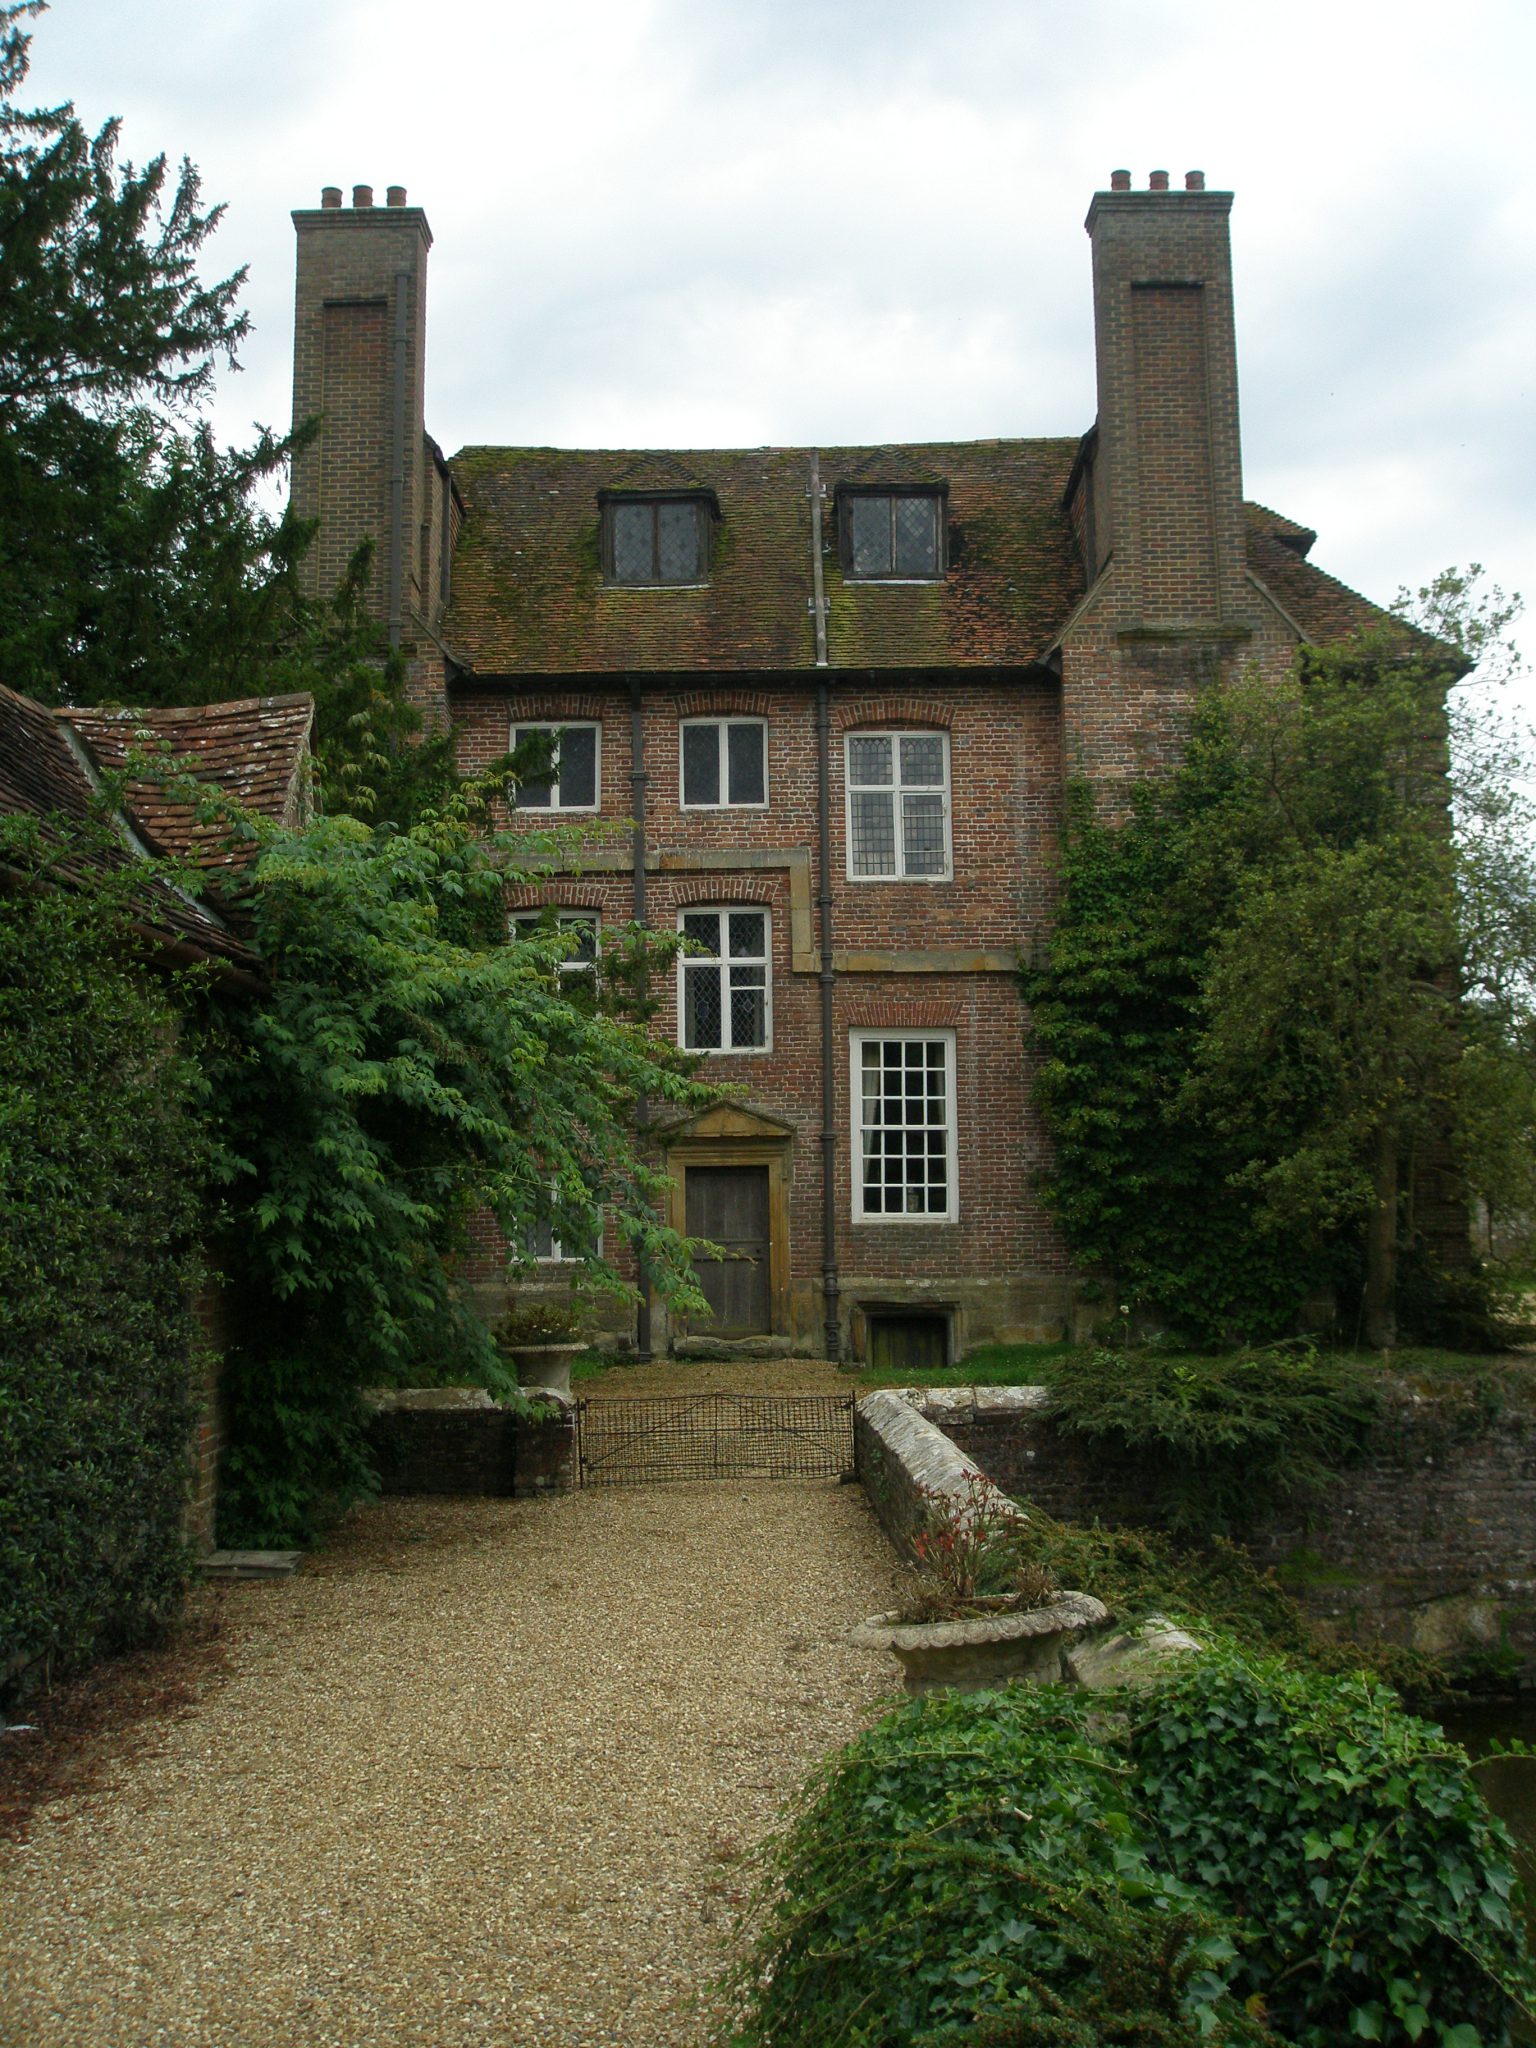 View of the House, over the Side Bridge